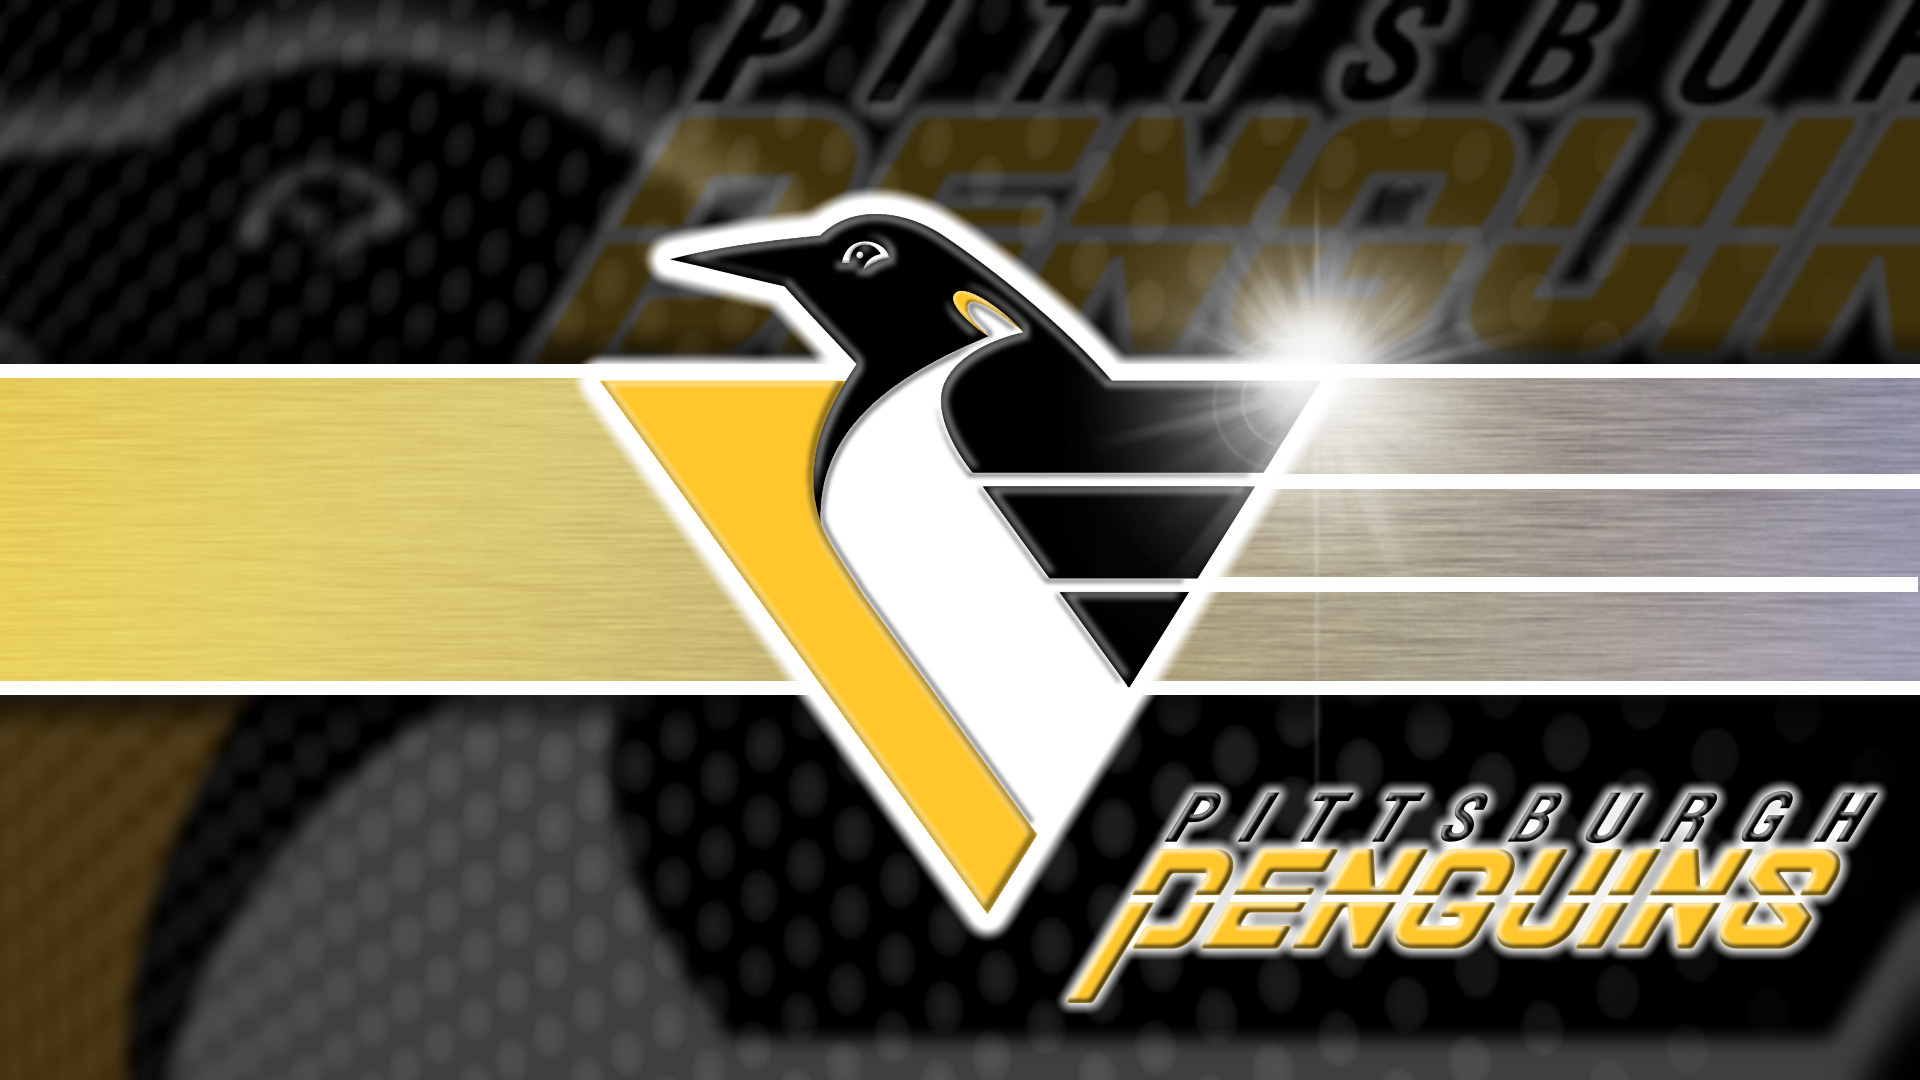 1920x1080 Pittsburgh Penguins (1992-2002) wallpaper by NASCARFAN160 on .